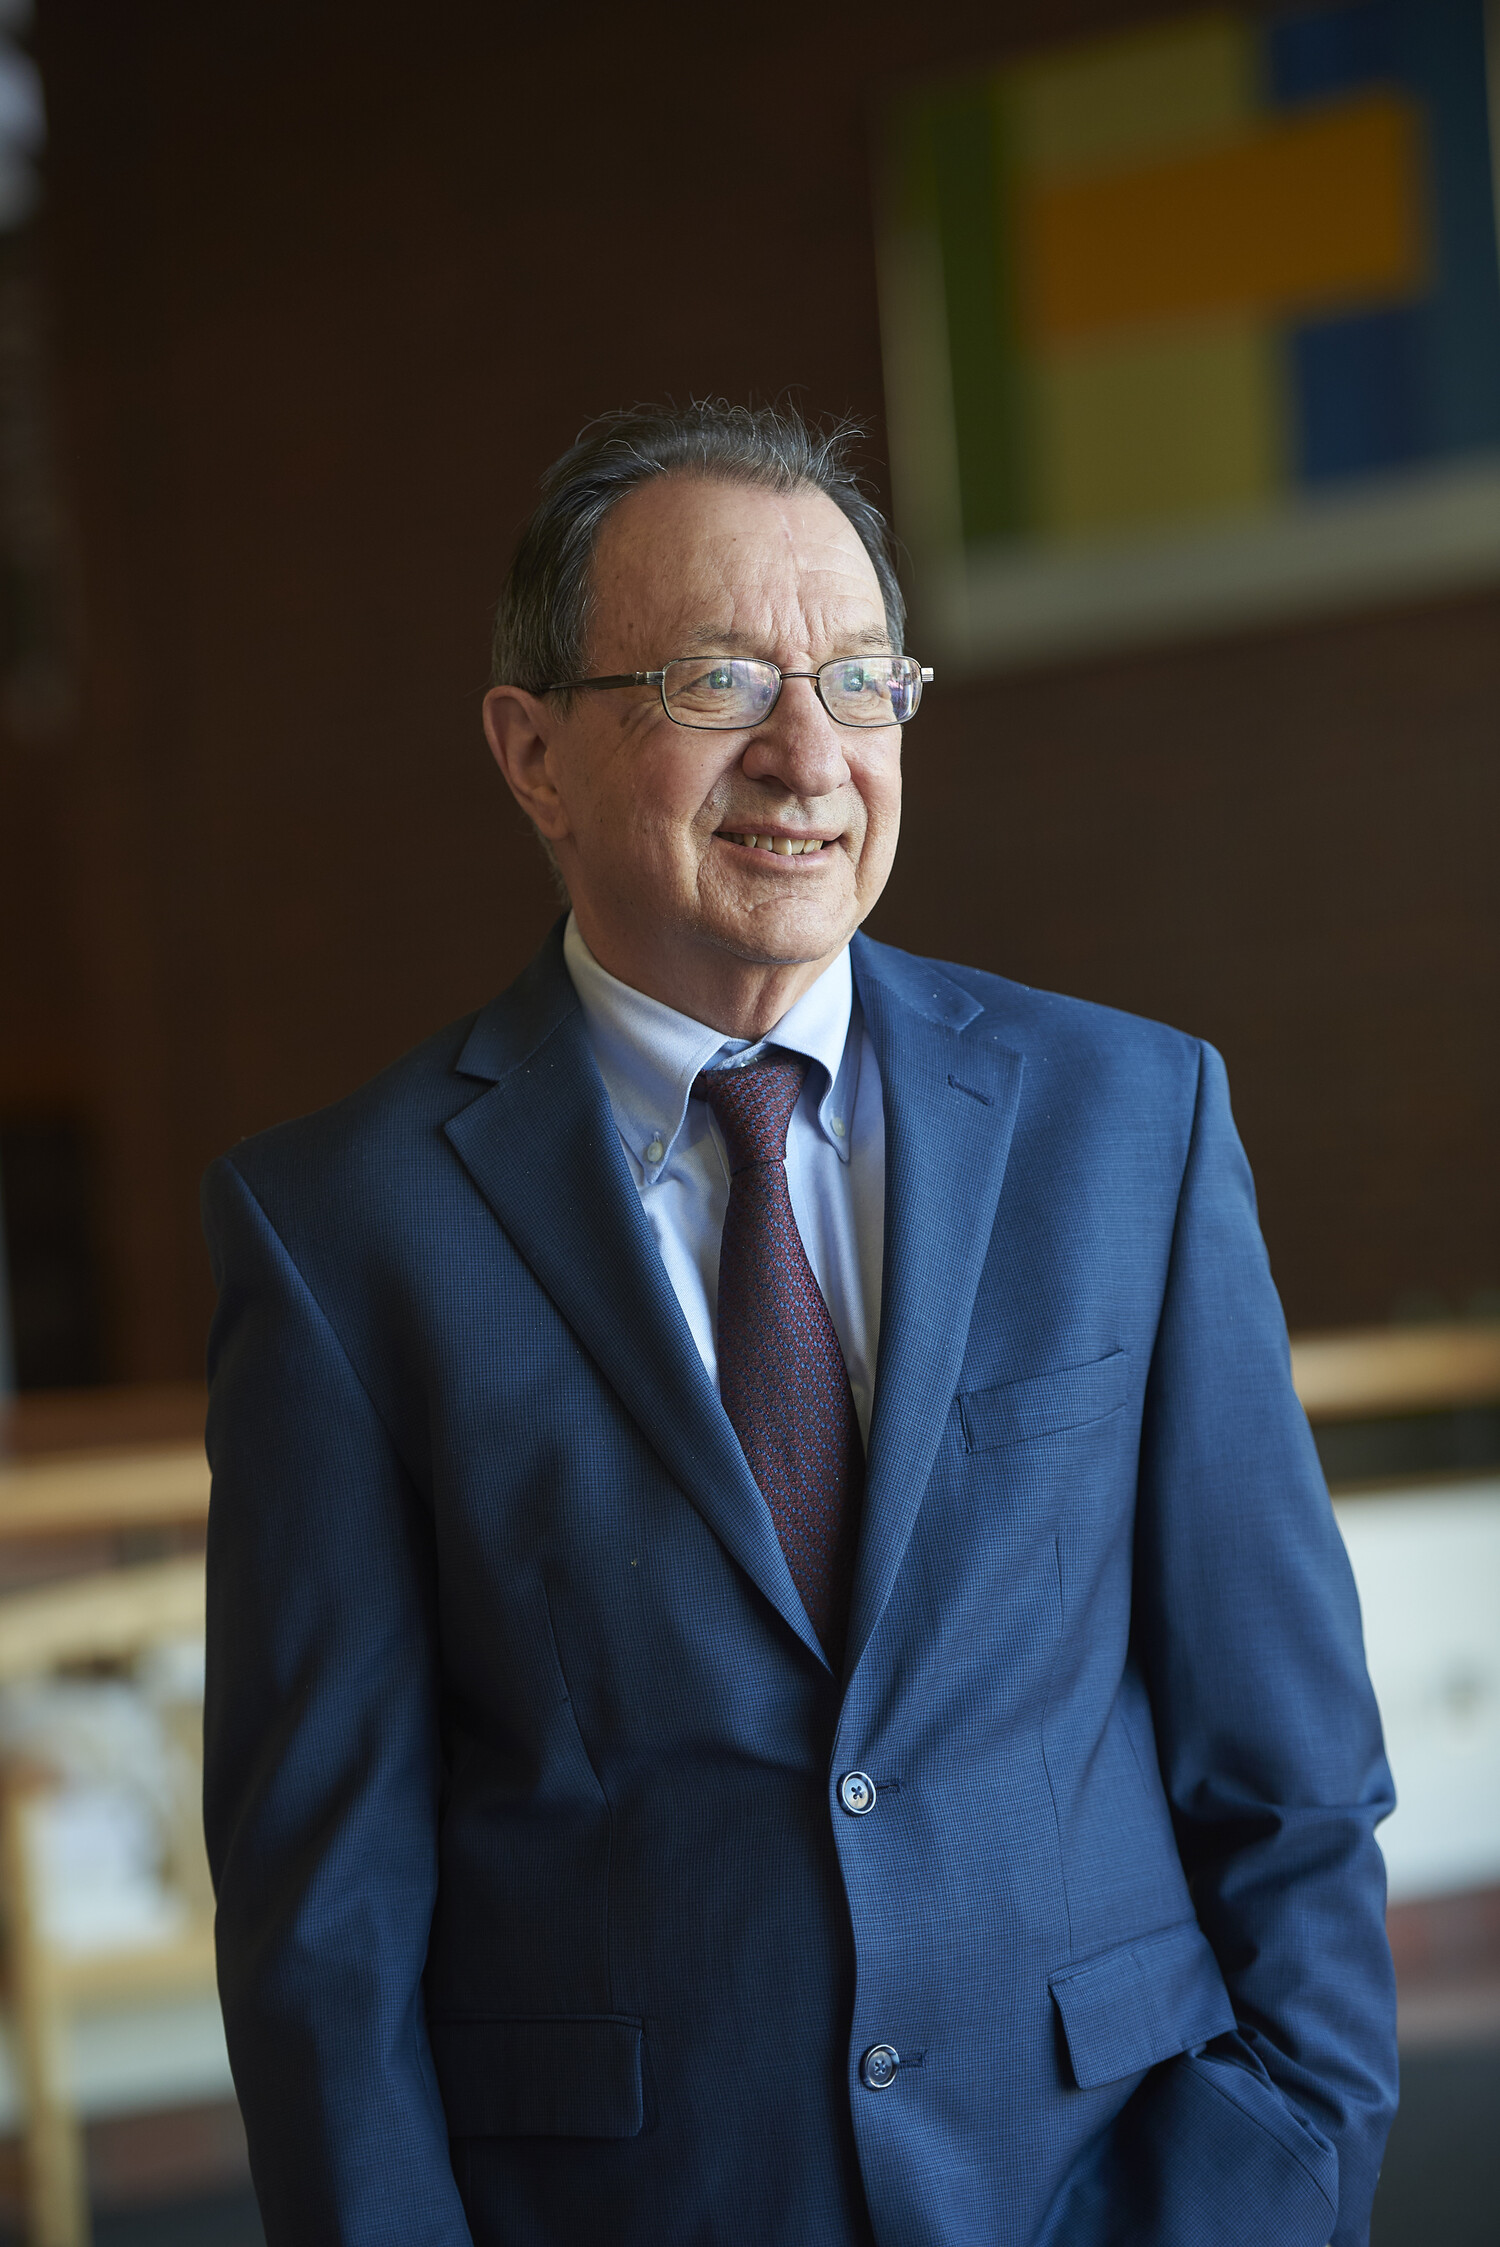 Professor Steve Befort '74 Retiring after nearly Four Decades at Law School